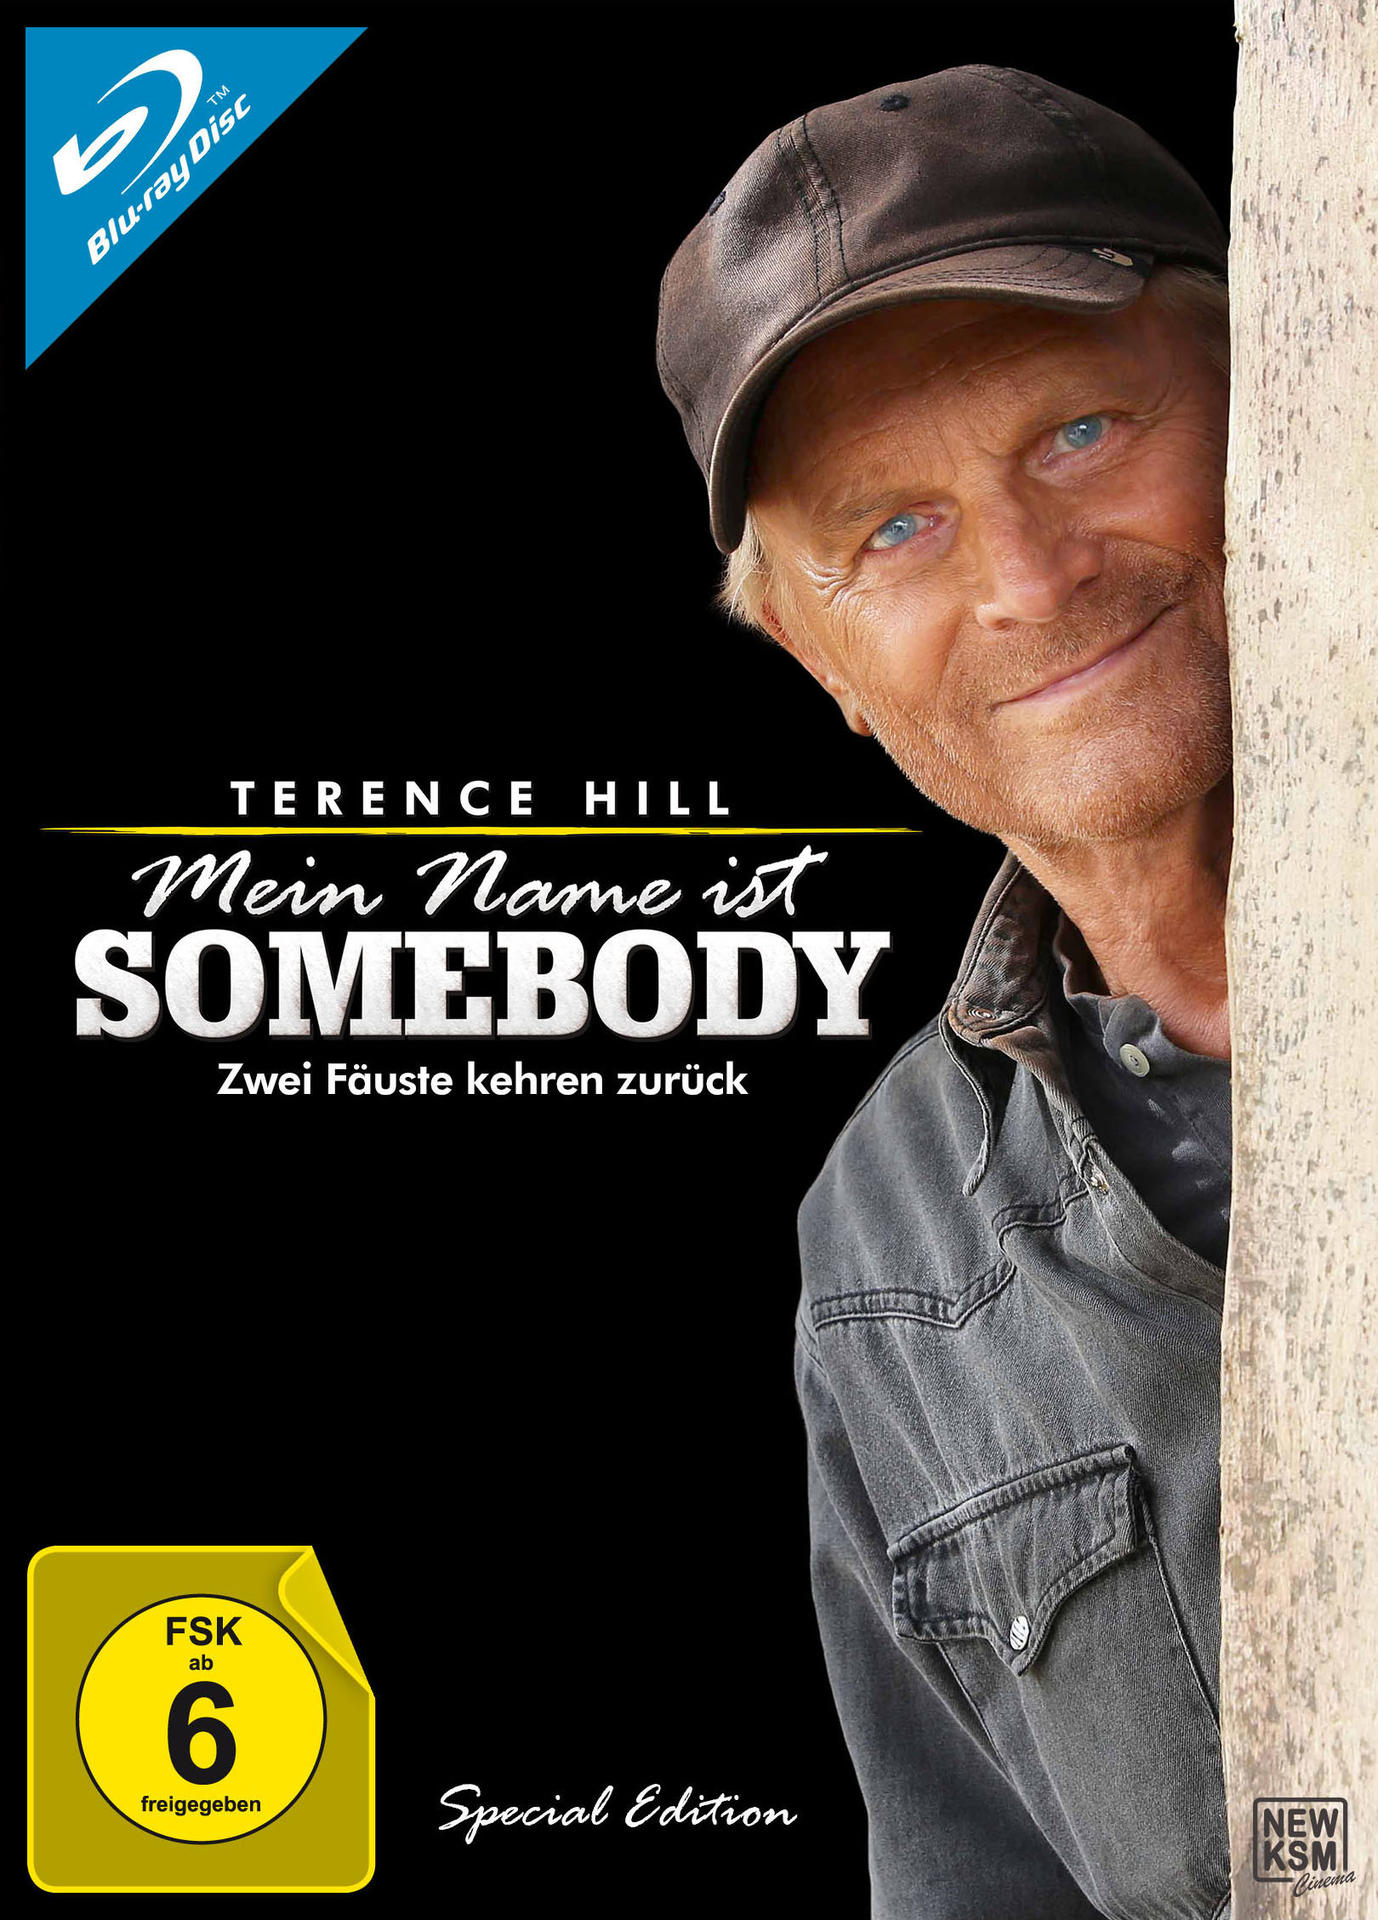 Name Mein Blu-ray Somebody ist